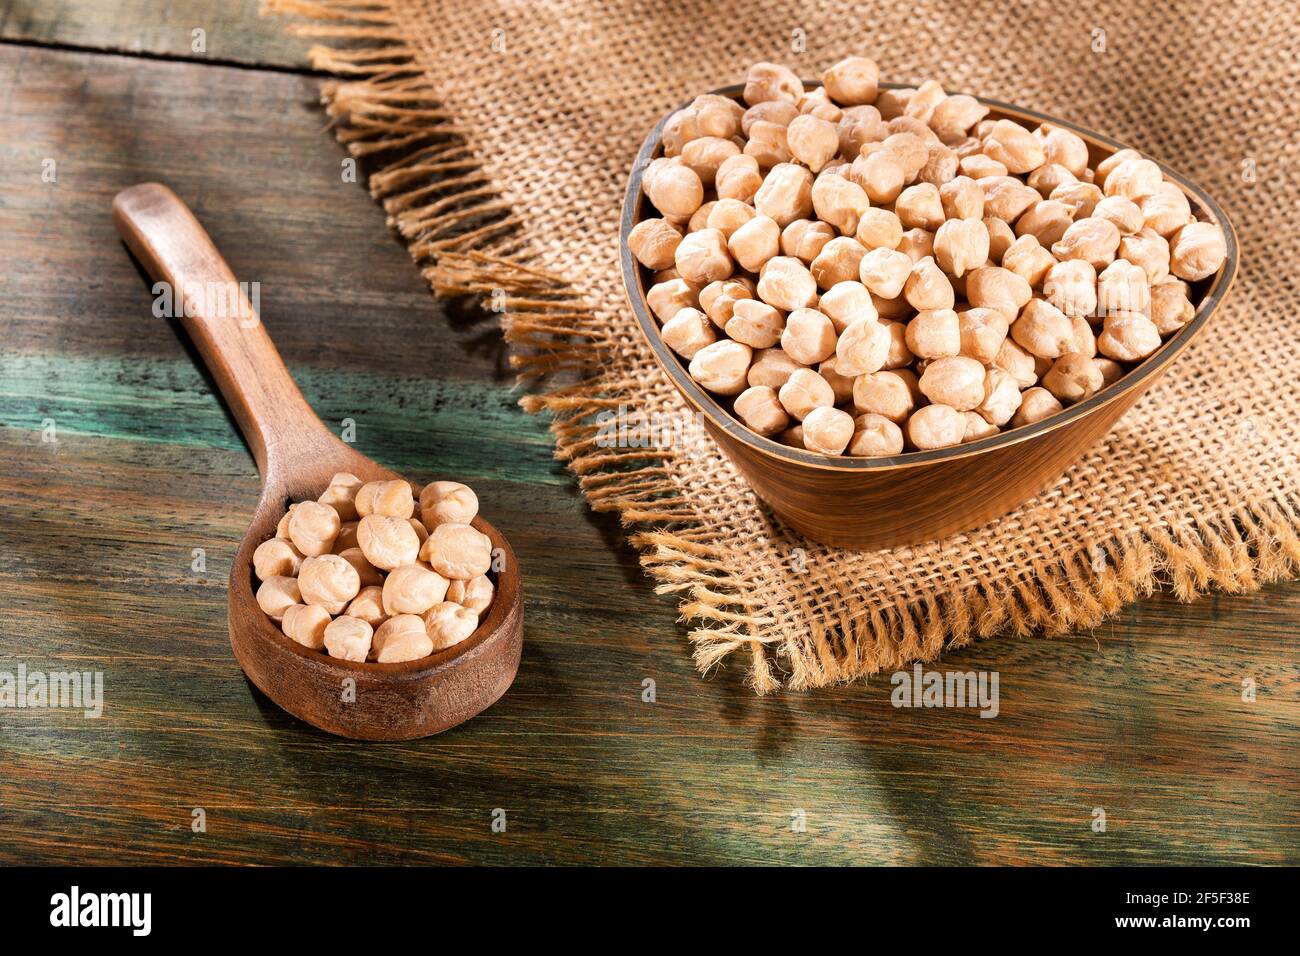 Cicer arietinum - Raw chickpeas in the wooden bowl Stock Photo